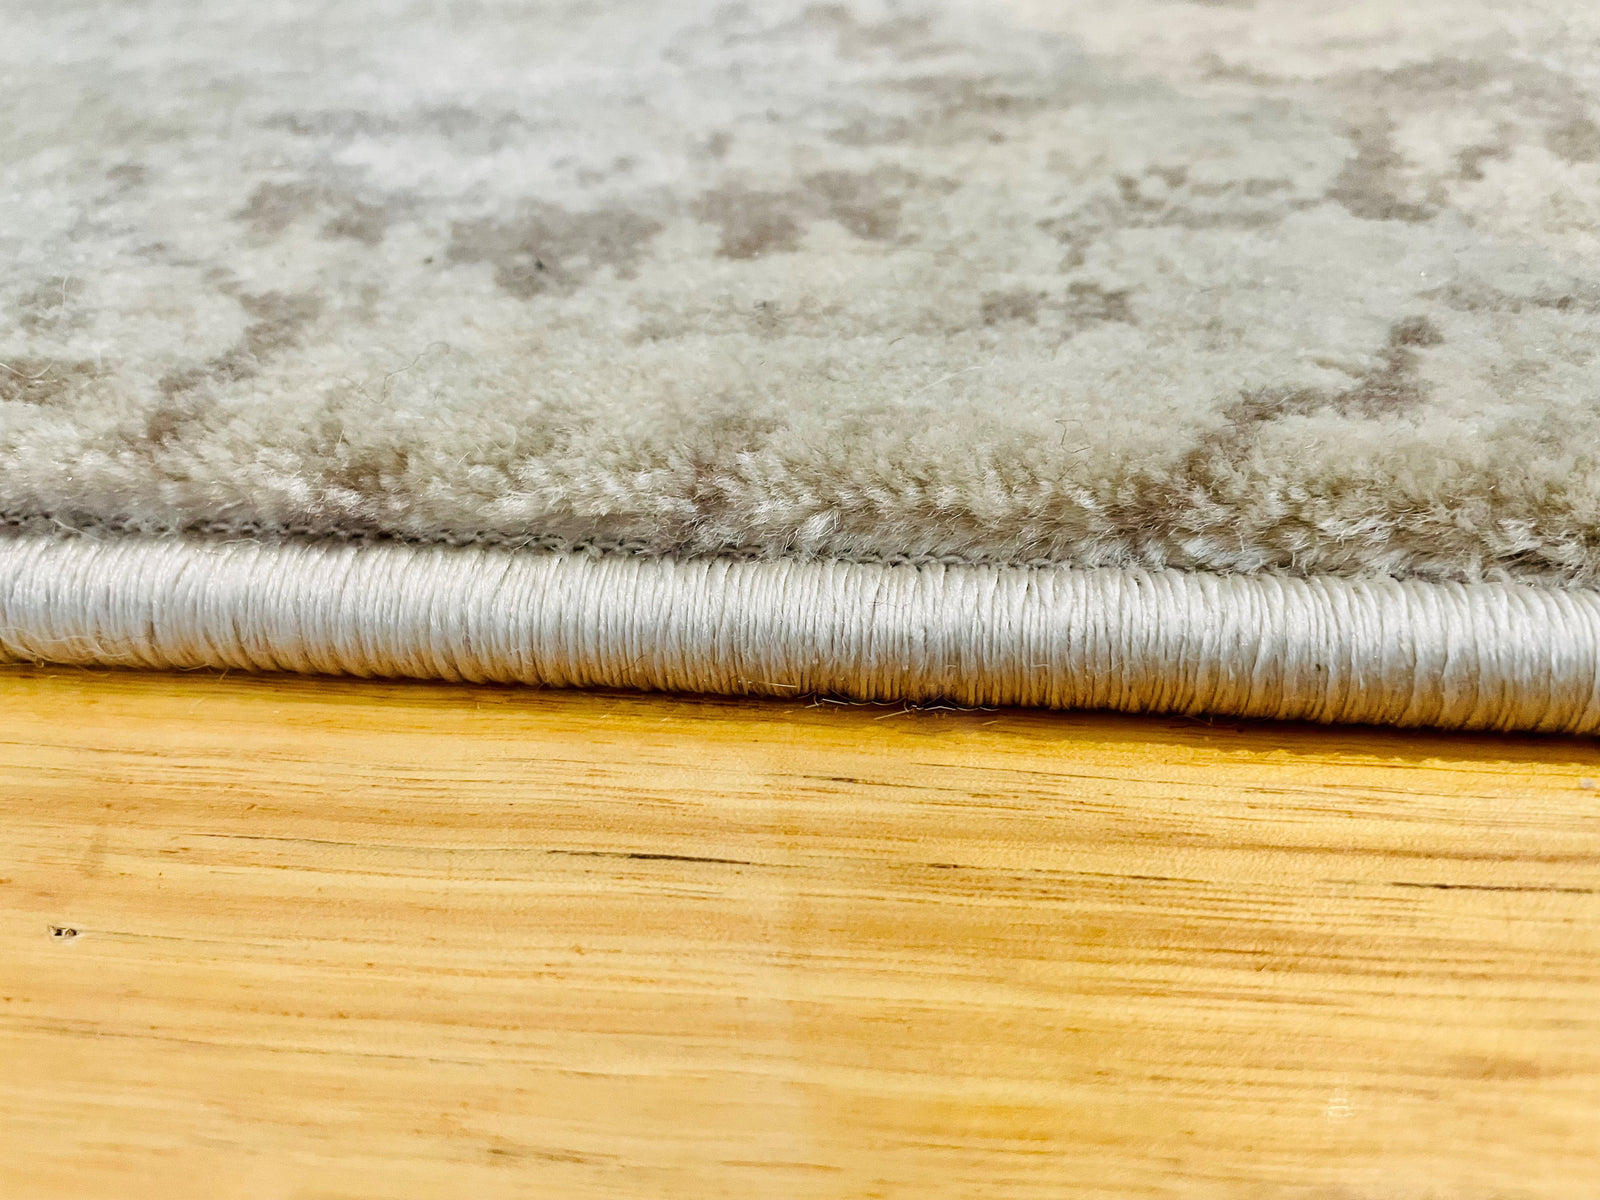 Rug Edging and Binding styles by Natural Floorcoverings of Sydney.